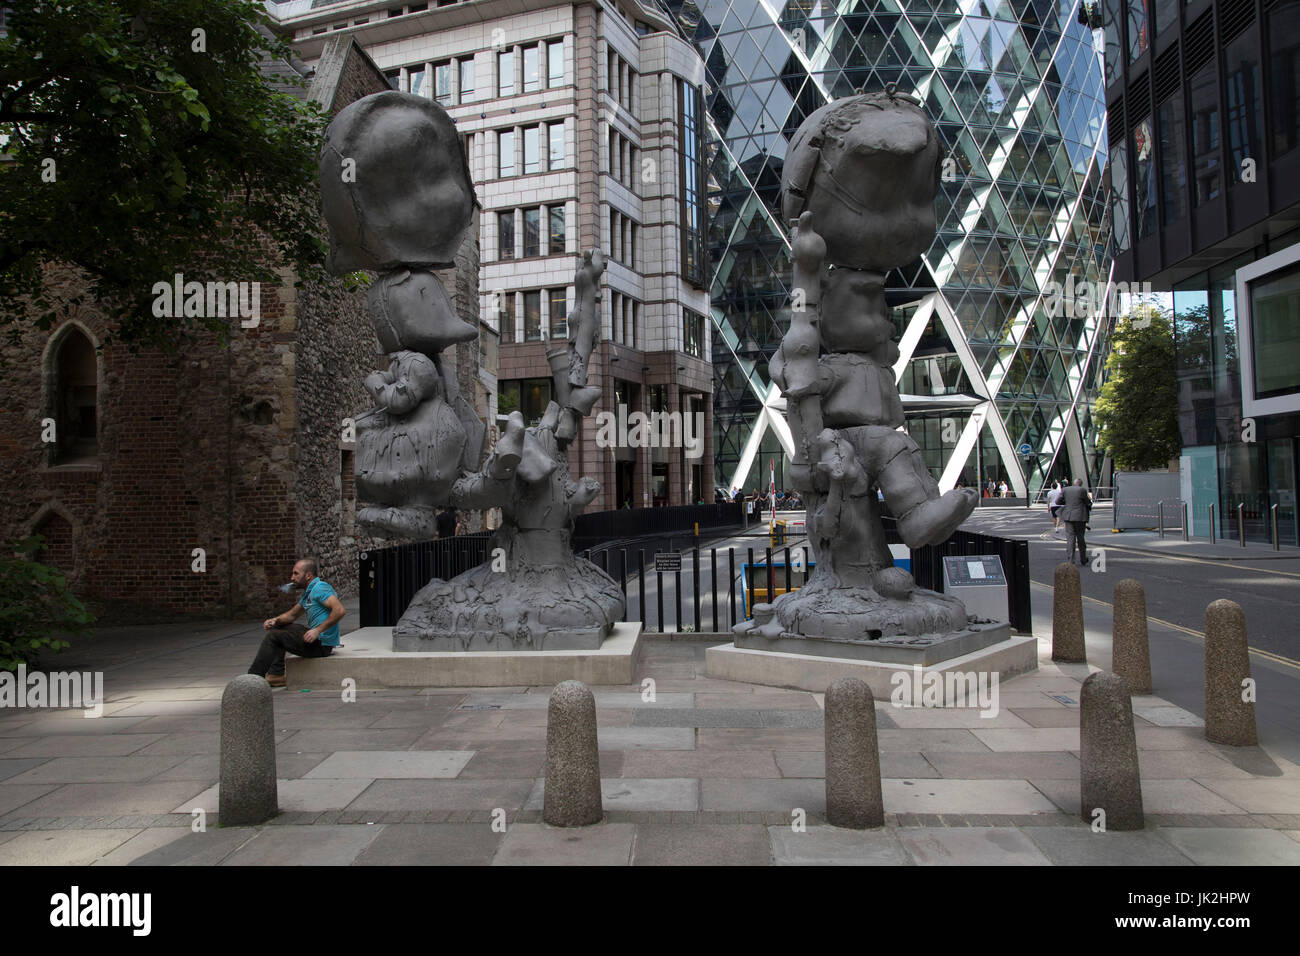 Sculpture in the City on July 17th 2017 in the City of London, England, United Kingdom. Each year, the critically acclaimed Sculpture in the City returns to the Square Mile with contemporary art works from internationally renowned artists in a public exhibition of artworks  open to everyone to come and interact with and enjoy. Apple Tree Boy Apple Tree Girl by Paul McCarthy 2010. Stock Photo